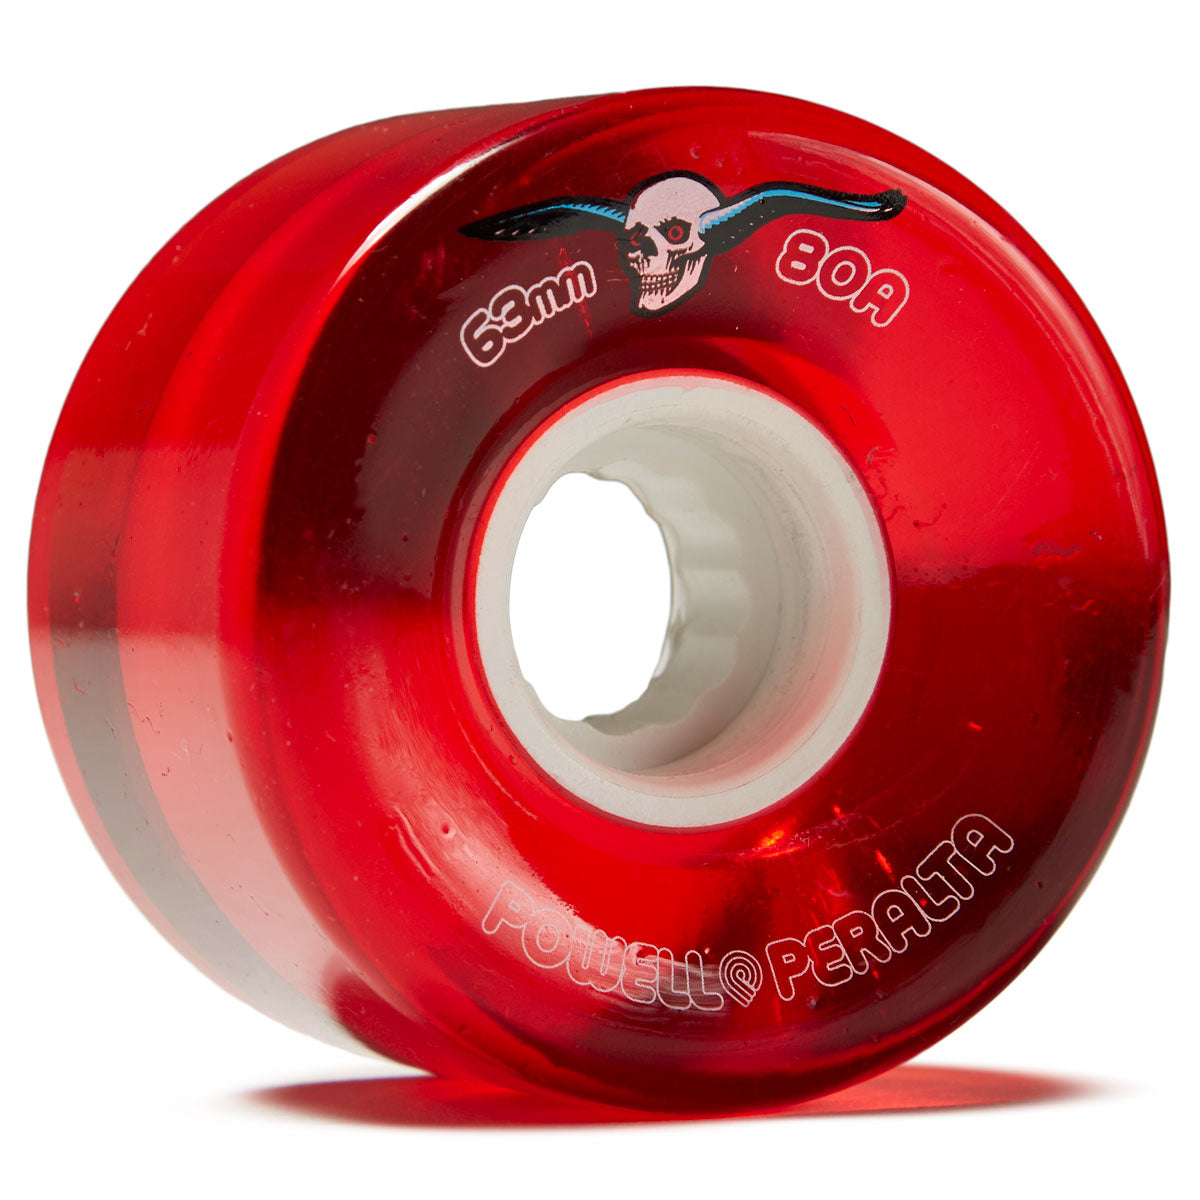 Powell-Peralta Clear Cruisers 80A Skateboard Wheels - Red - 63mm image 1